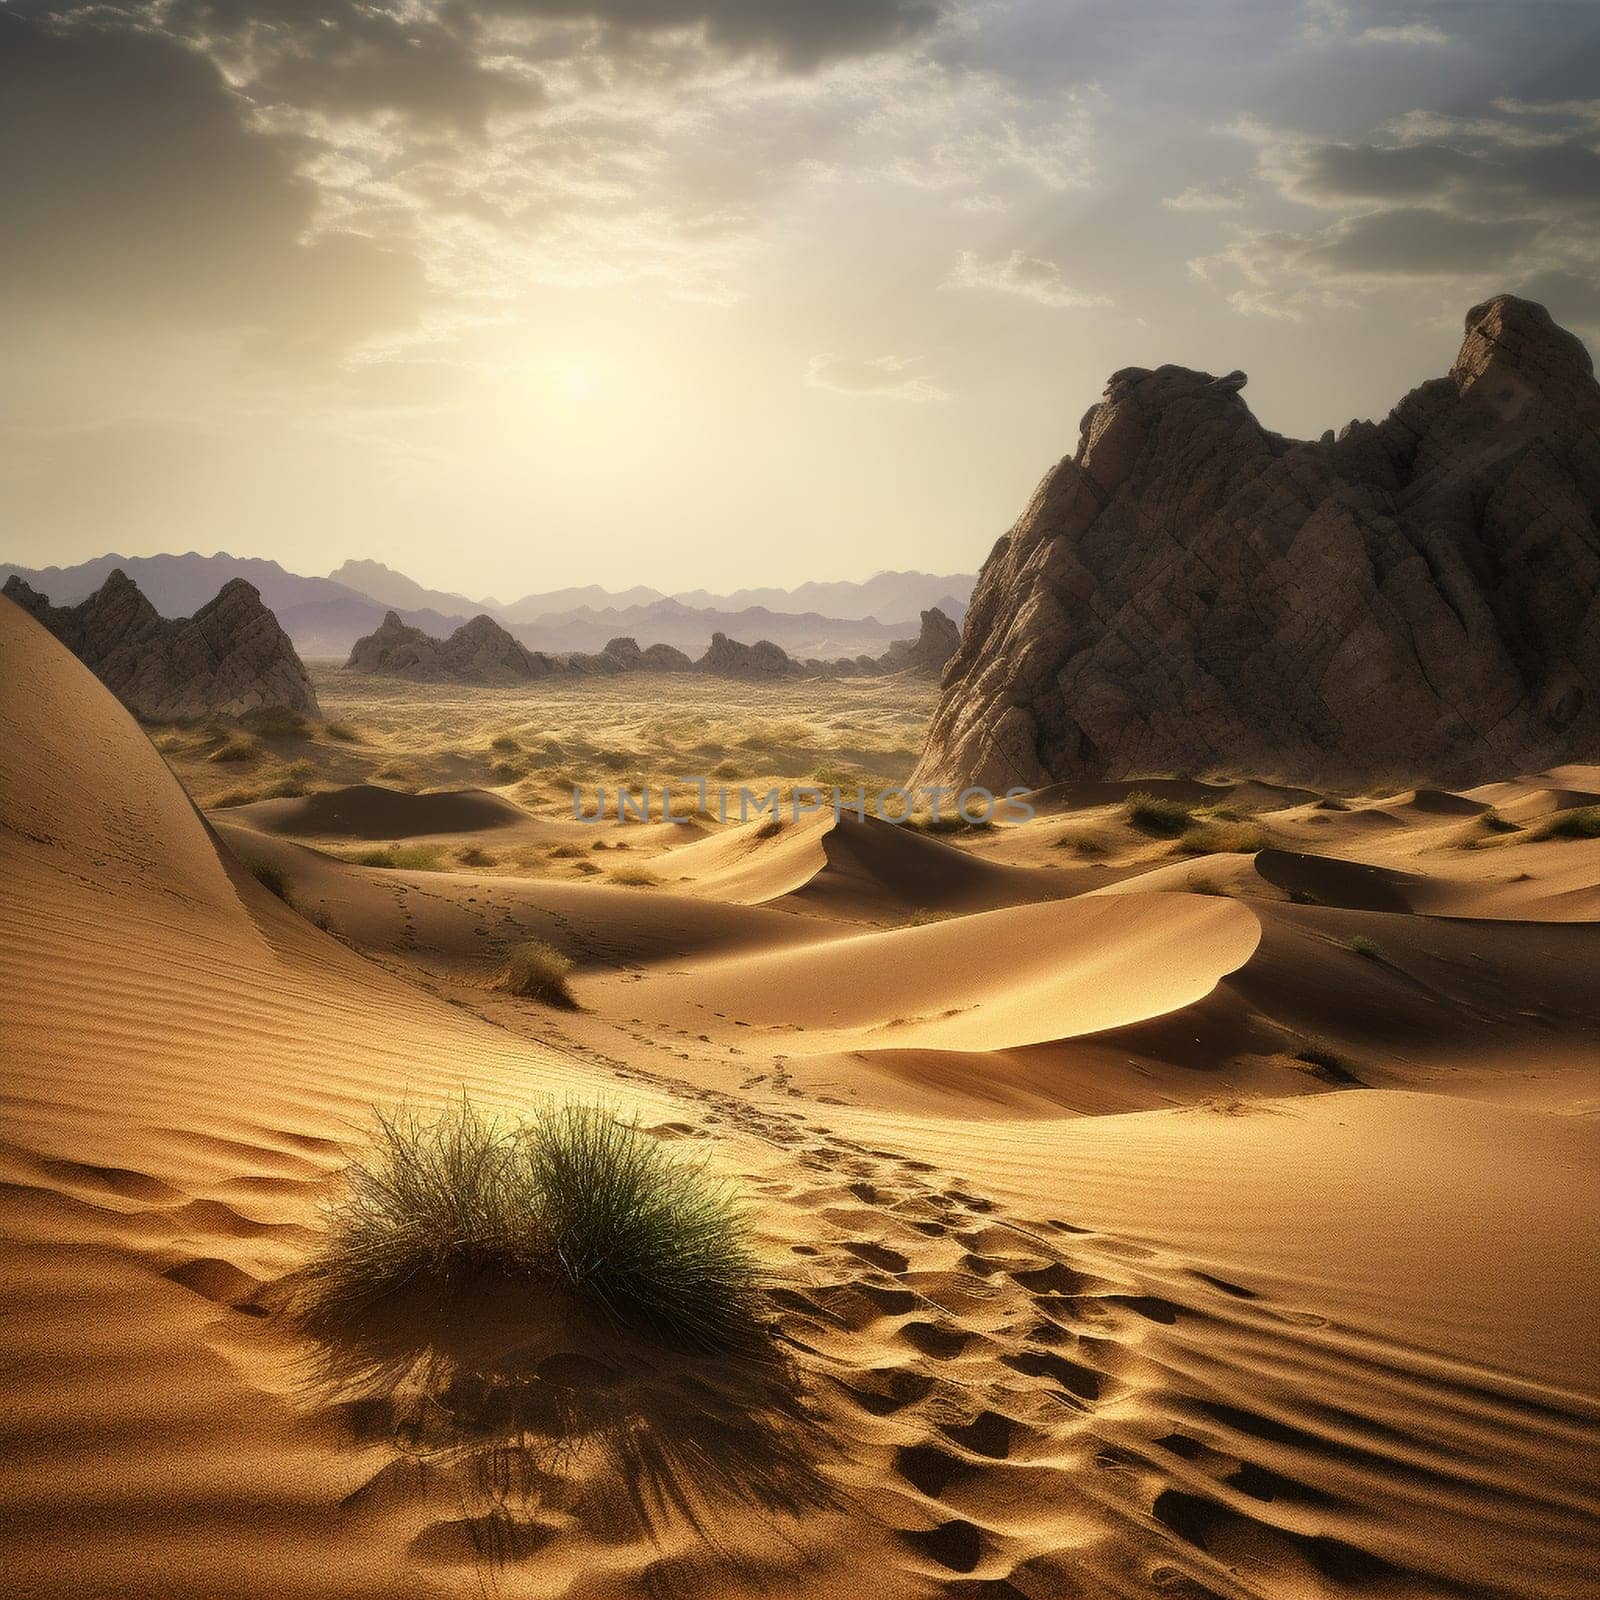 Enter a world of solitude and mystery in this beautiful, expansive desert landscape. The scene features sand dunes, rock formations, or other natural features, with a vast expanse of sky overhead that emphasizes the isolation of the setting. There's a sense of quiet and stillness that permeates the scene, with the suggestion of hidden secrets and undiscovered treasures just waiting to be found. This is a place where you can lose yourself in the beauty and mystery of the desert, and discover the secrets that lie within.